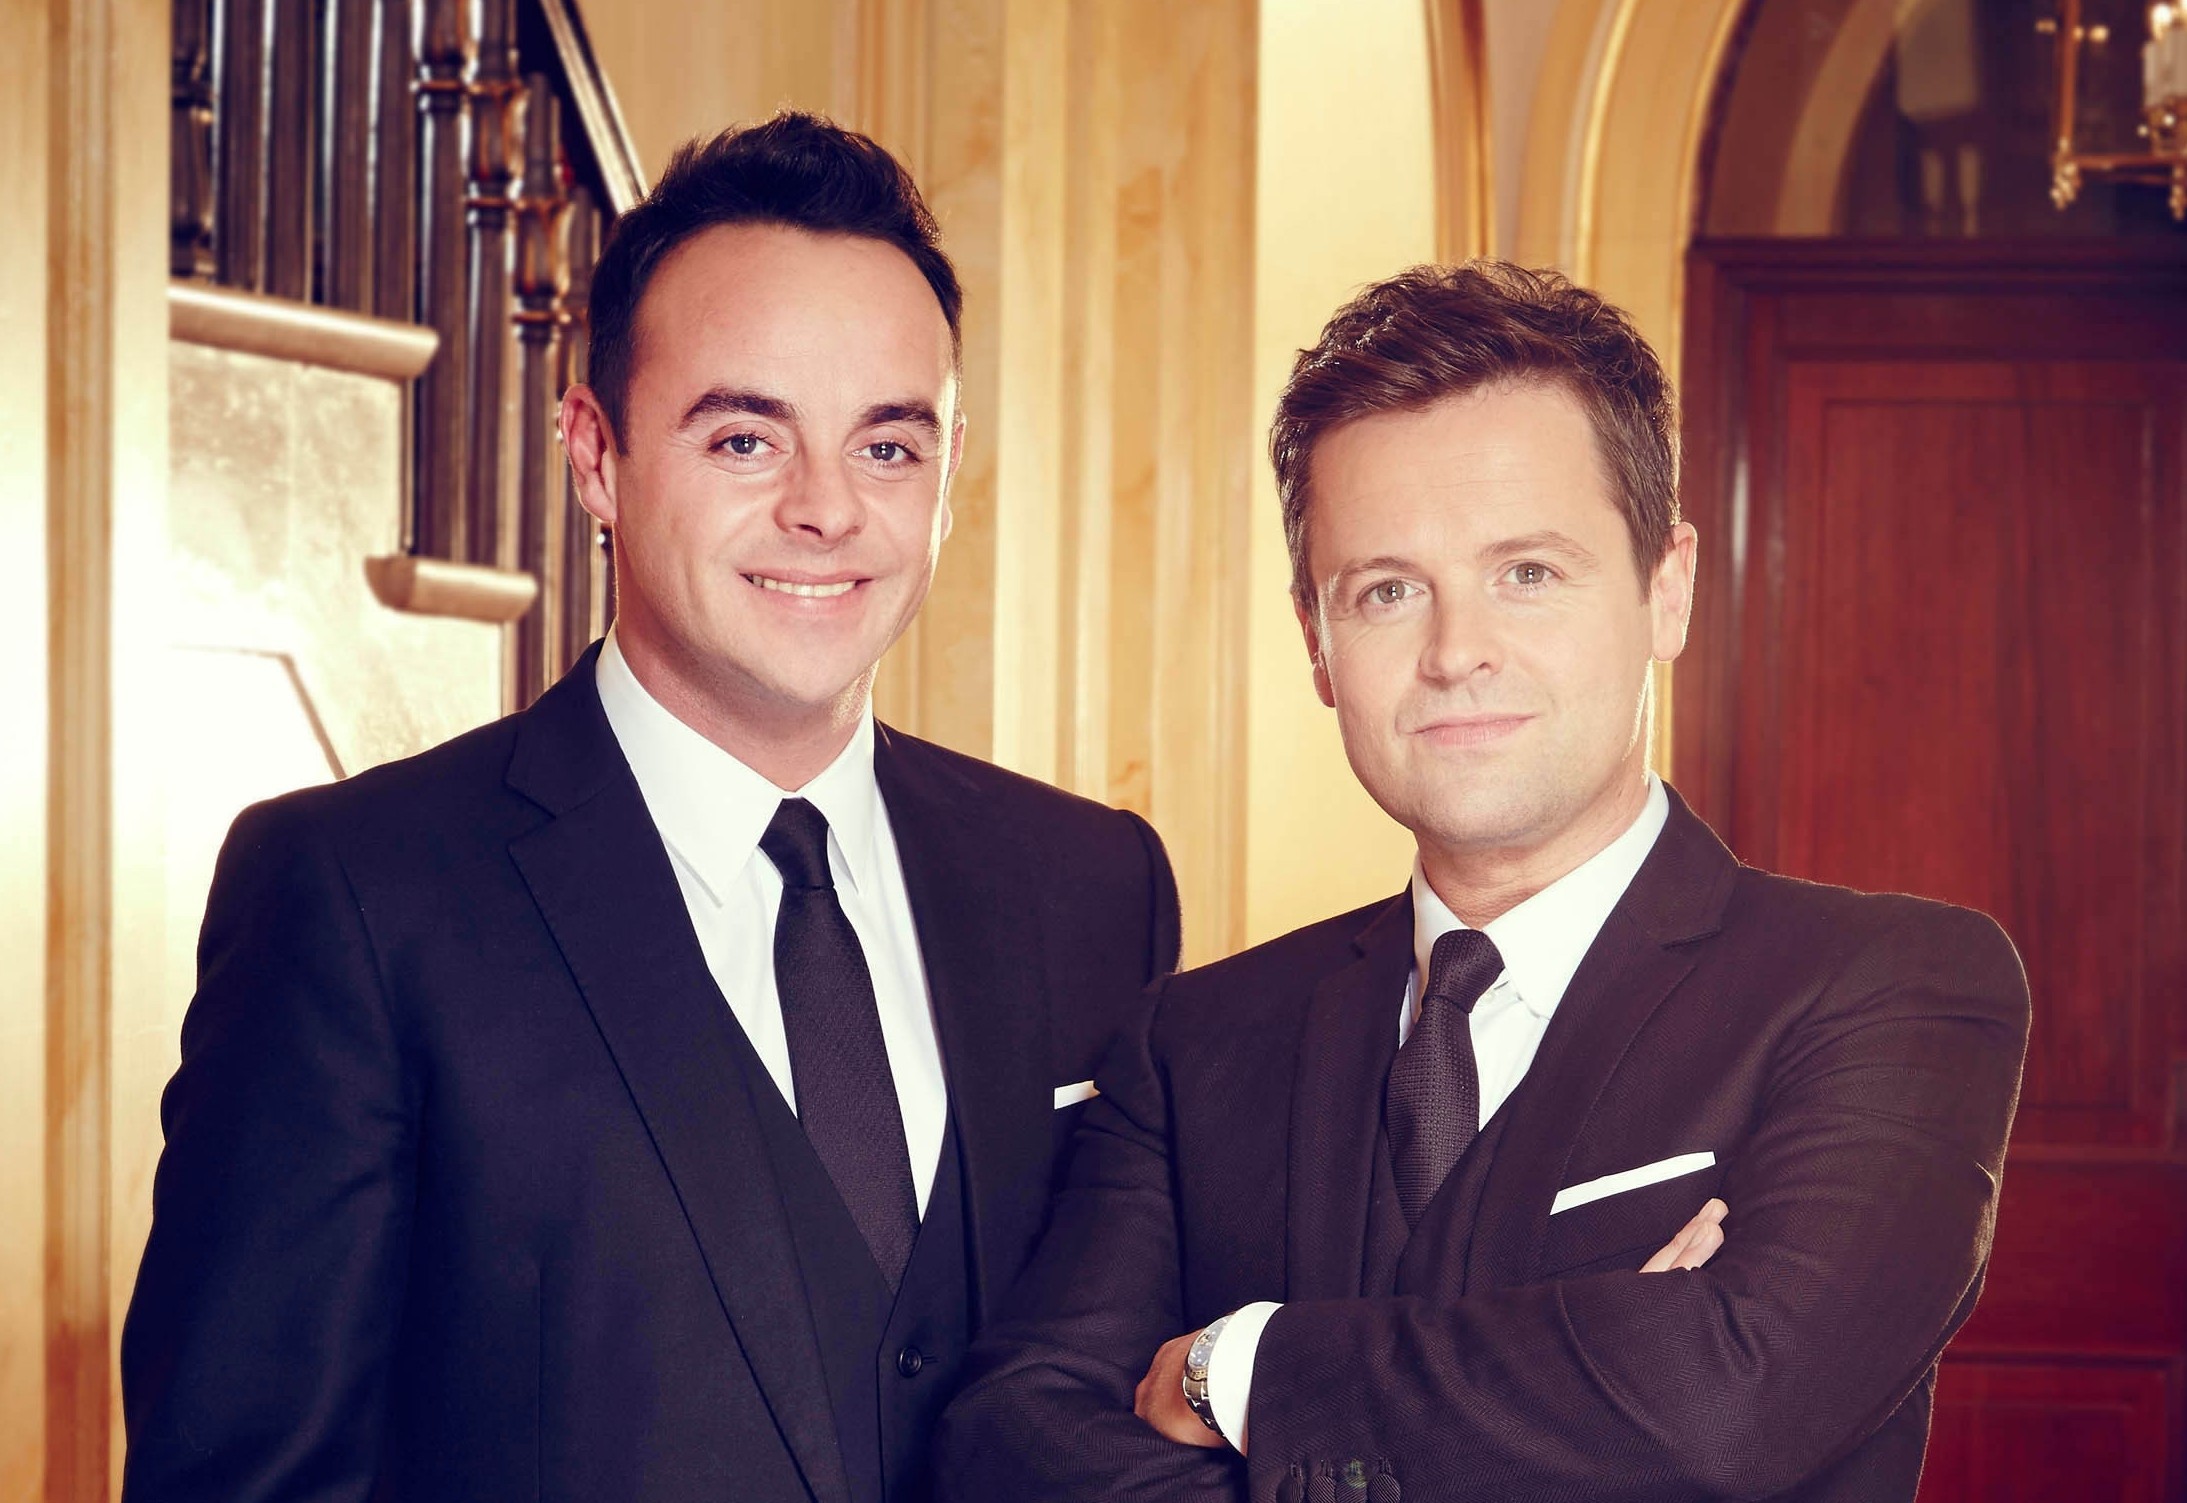 Ant and Dec, formerly known as PJ and Duncan